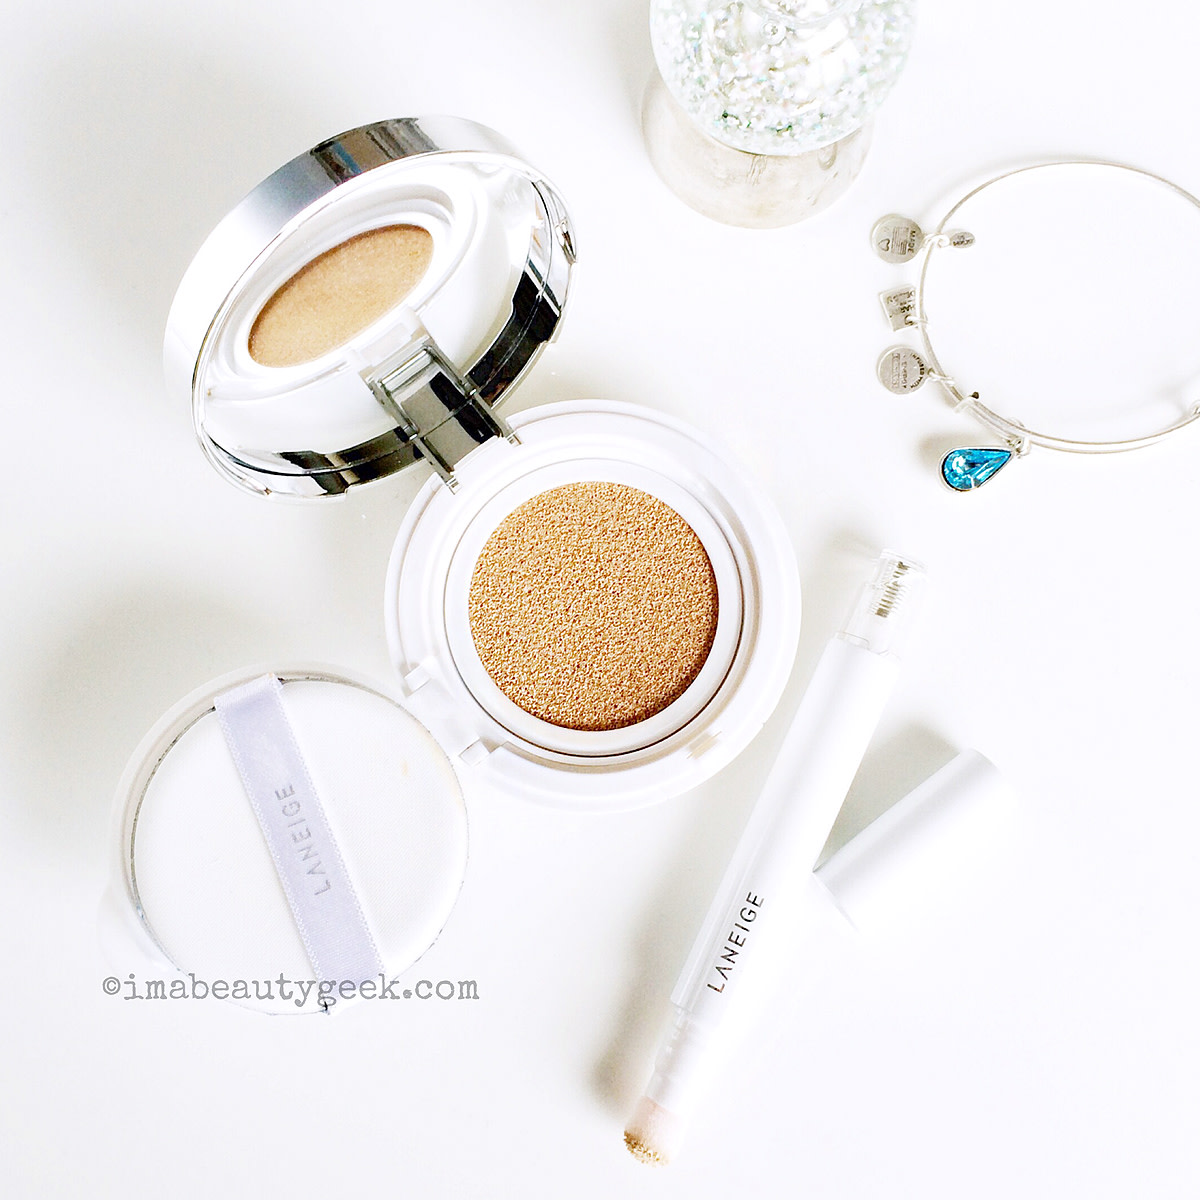 Laneige BB Cushion Compact and Laneige Cushion Concealer